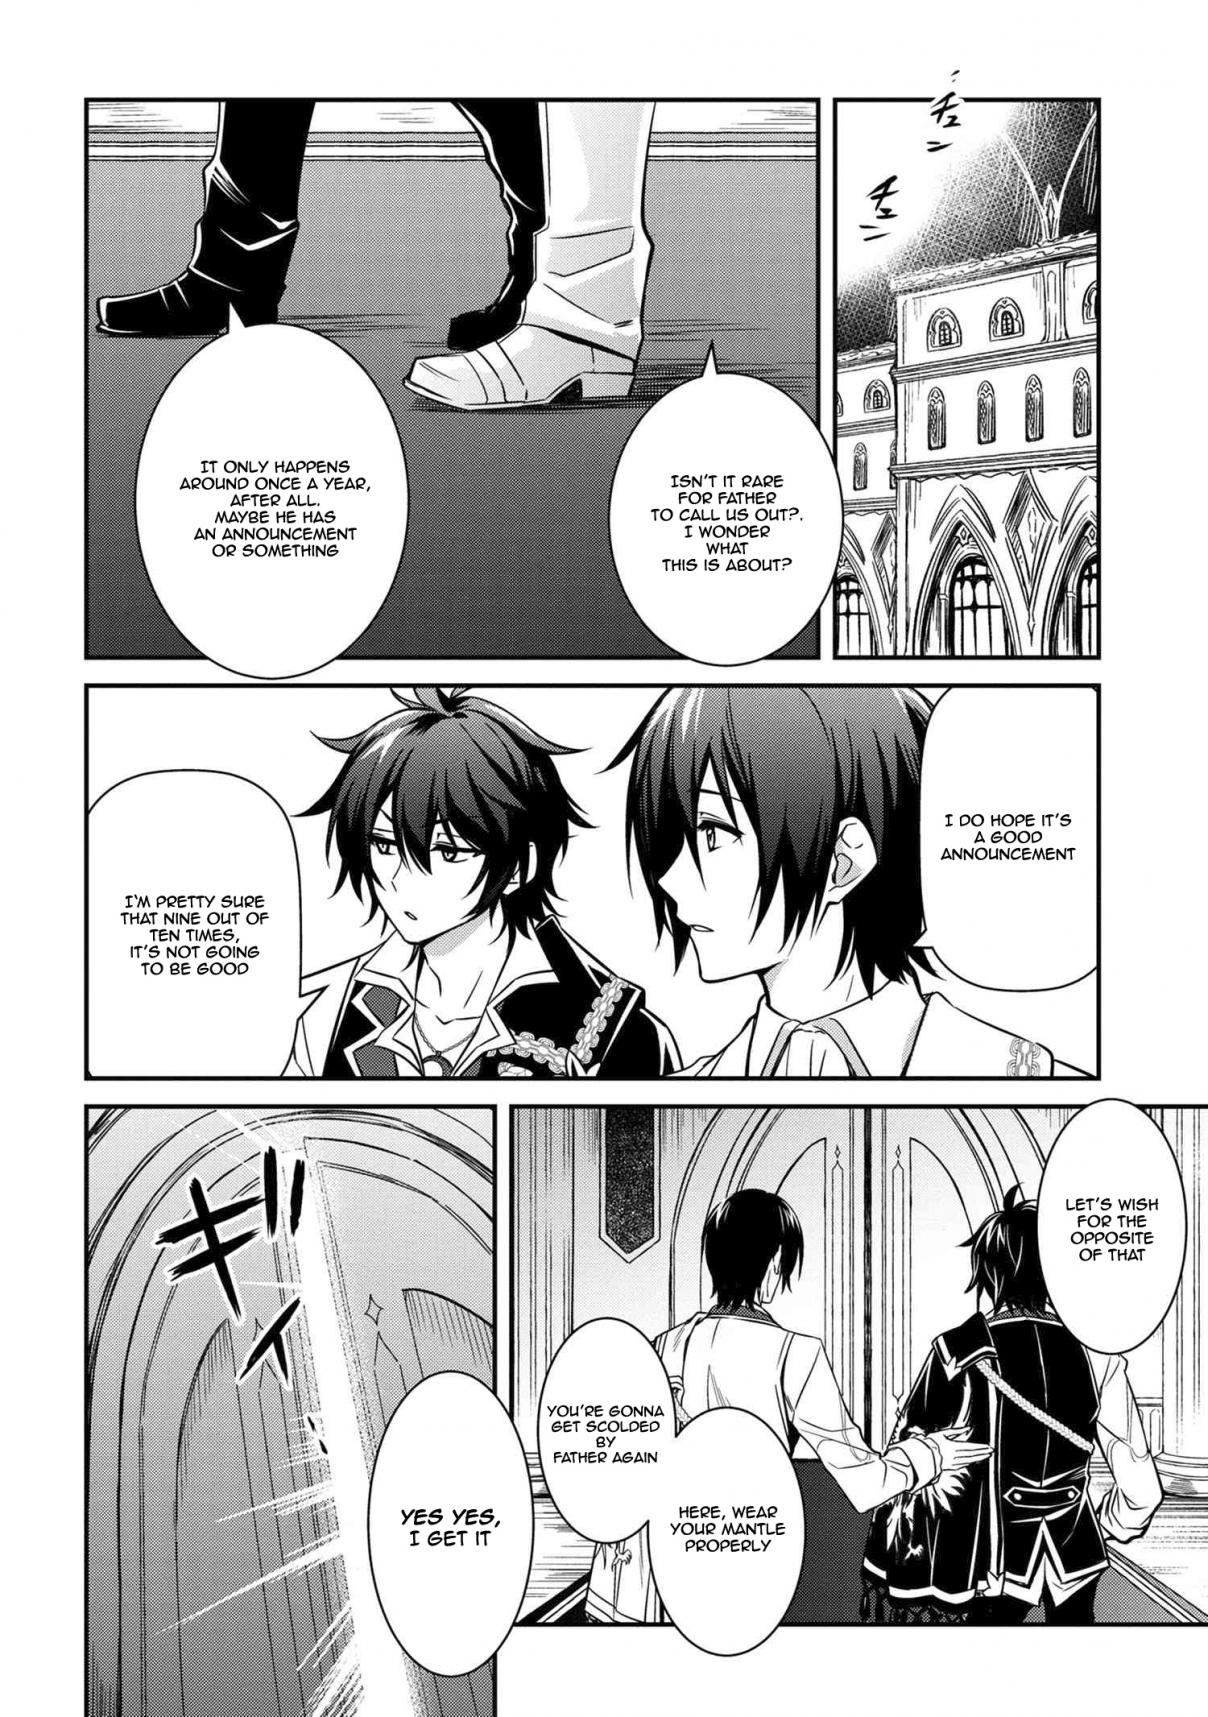 The Strongest Dull Prince’s Secret Battle for the Throne Vol. 1 Ch. 6.2